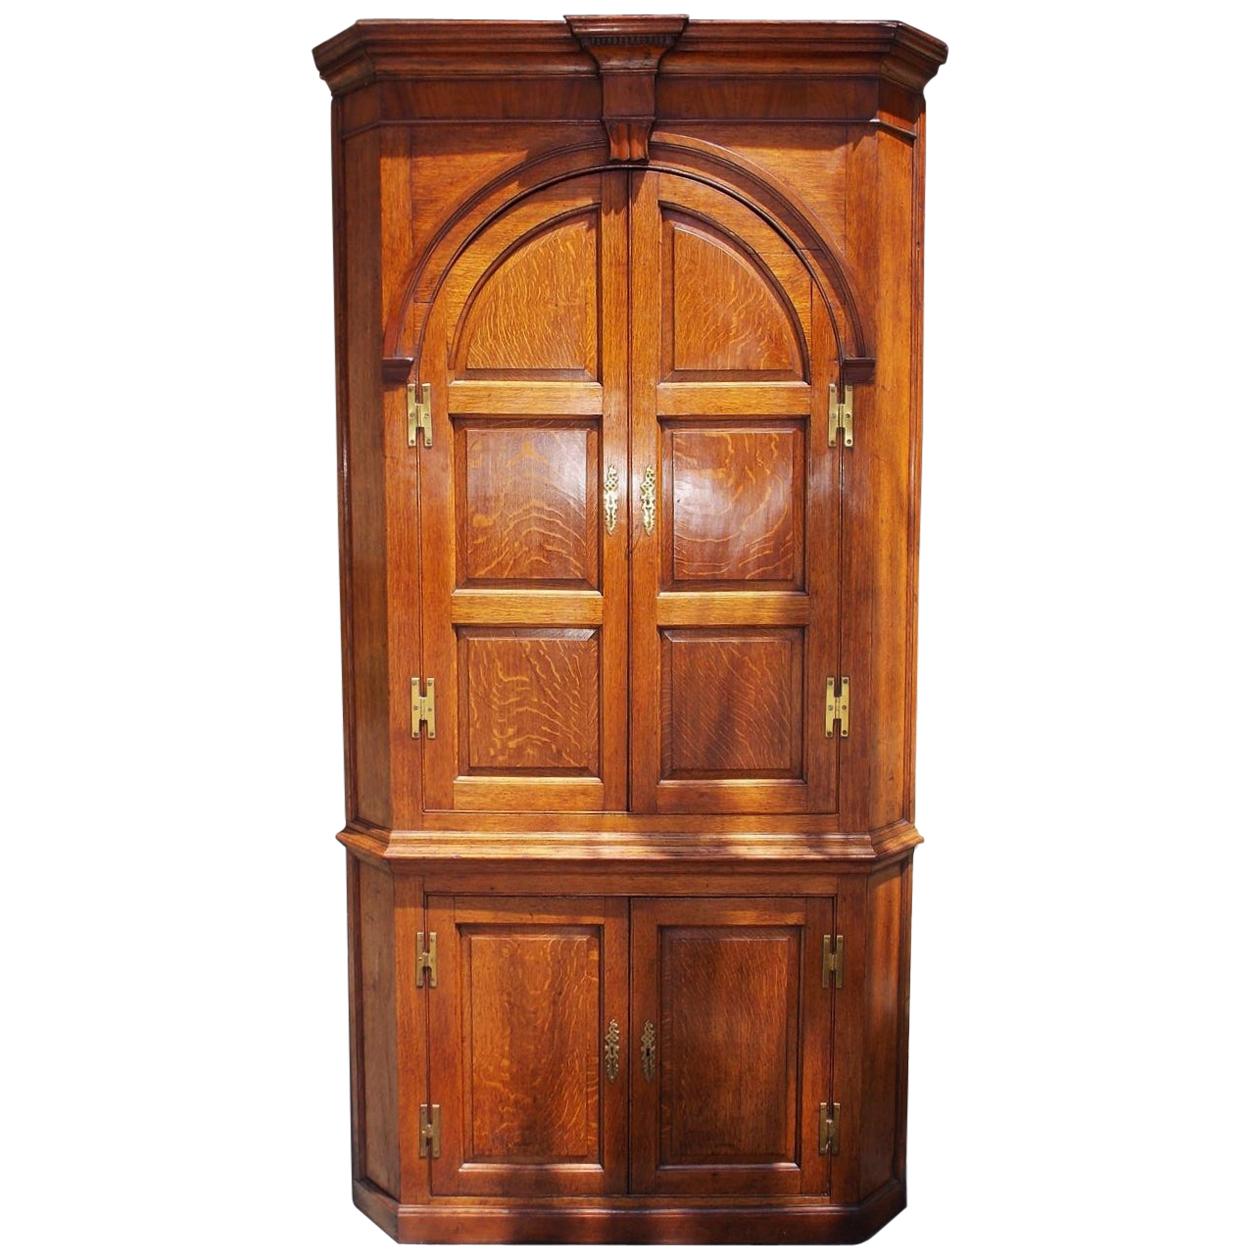 English Oak Arched and Paneled Blind Door H-Hinged Corner Cabinet, Circa 1770 For Sale